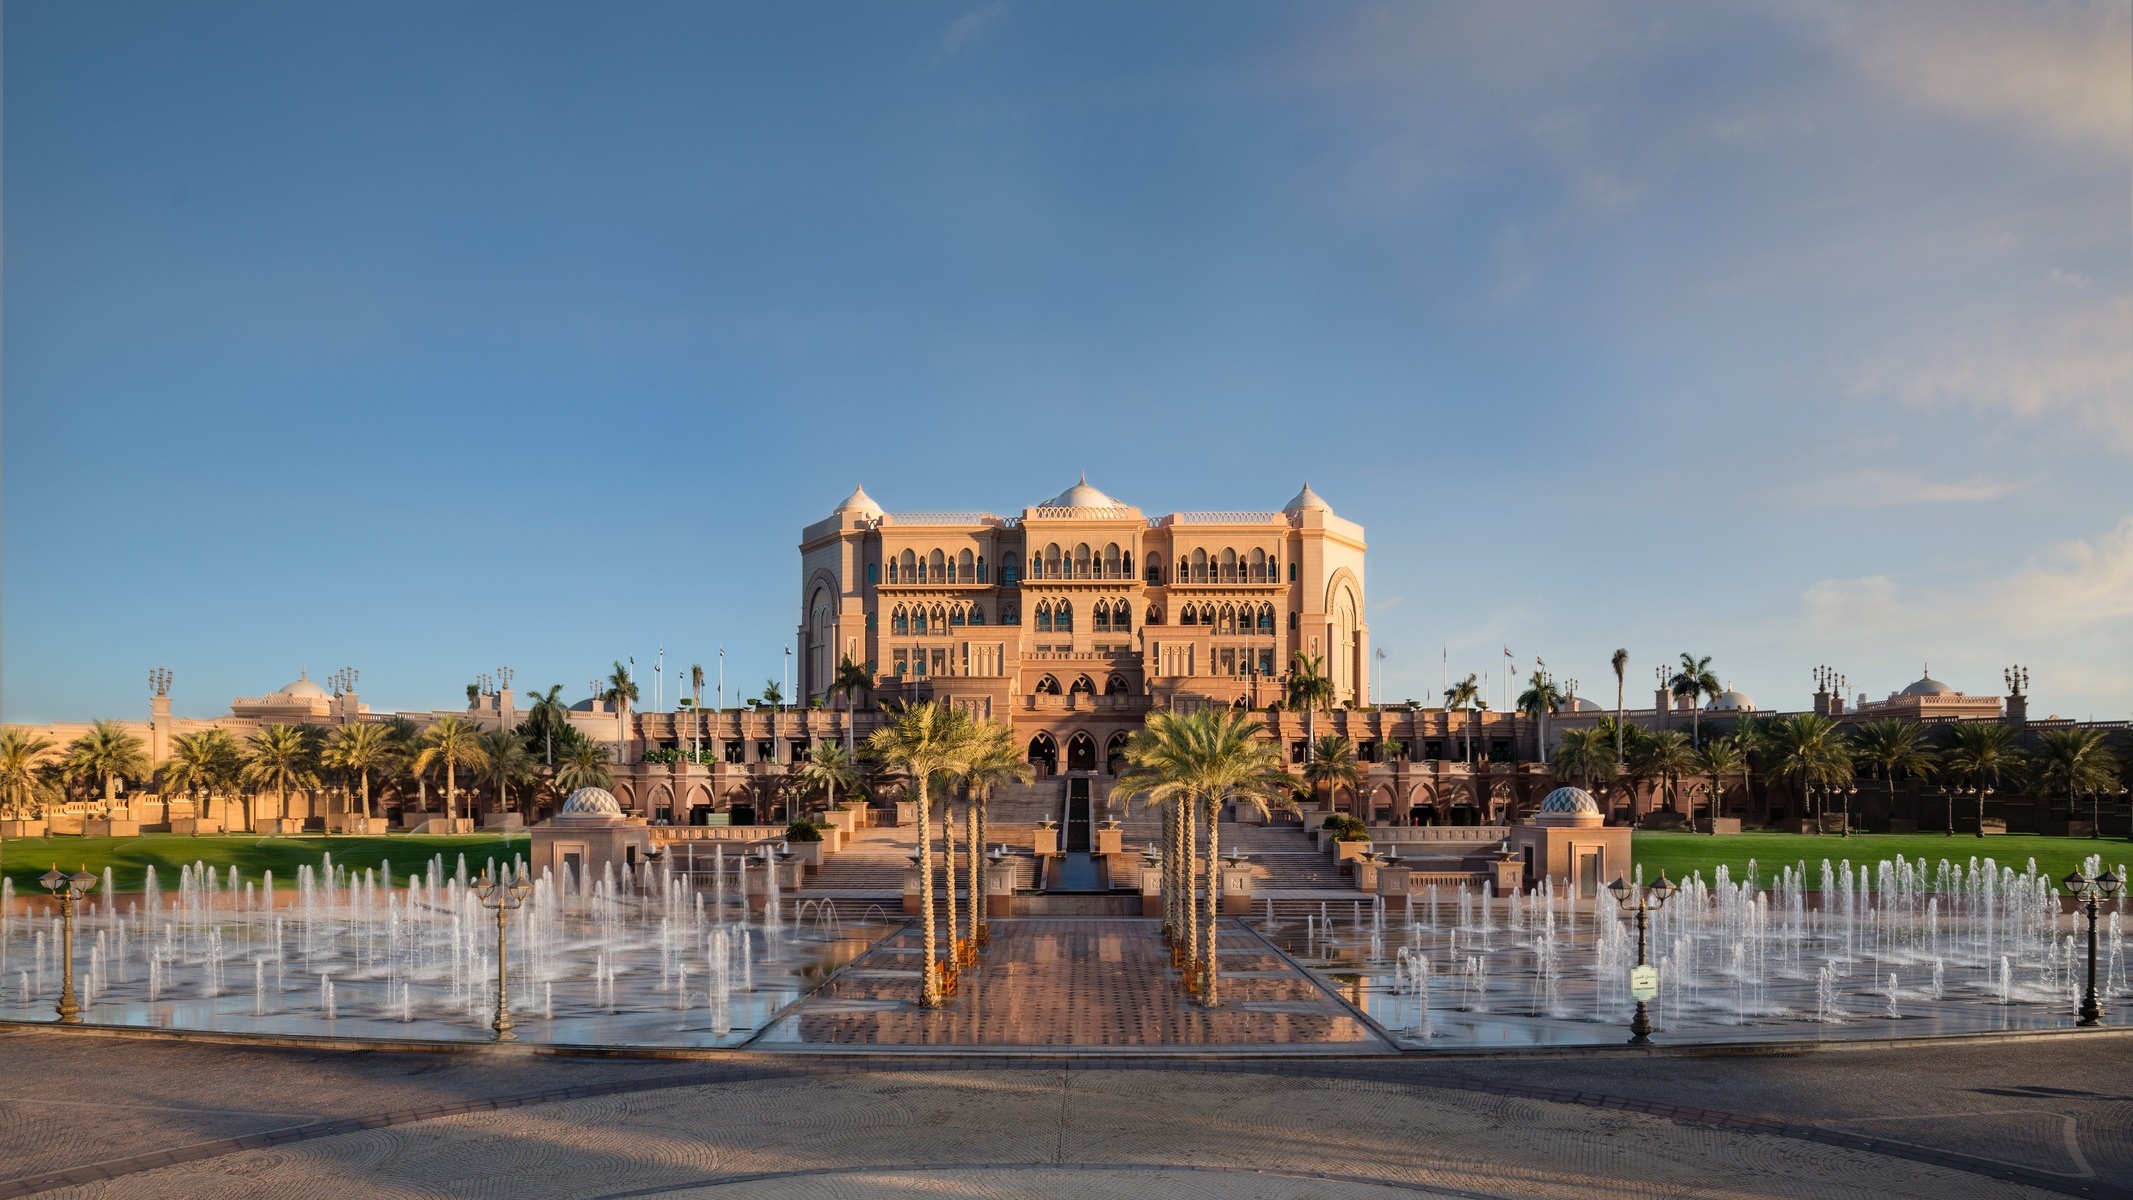 Palace: Emirates Palace, Designed by WATG Architects, Managed by Mandarin Oriental. 2140x1200 HD Wallpaper.